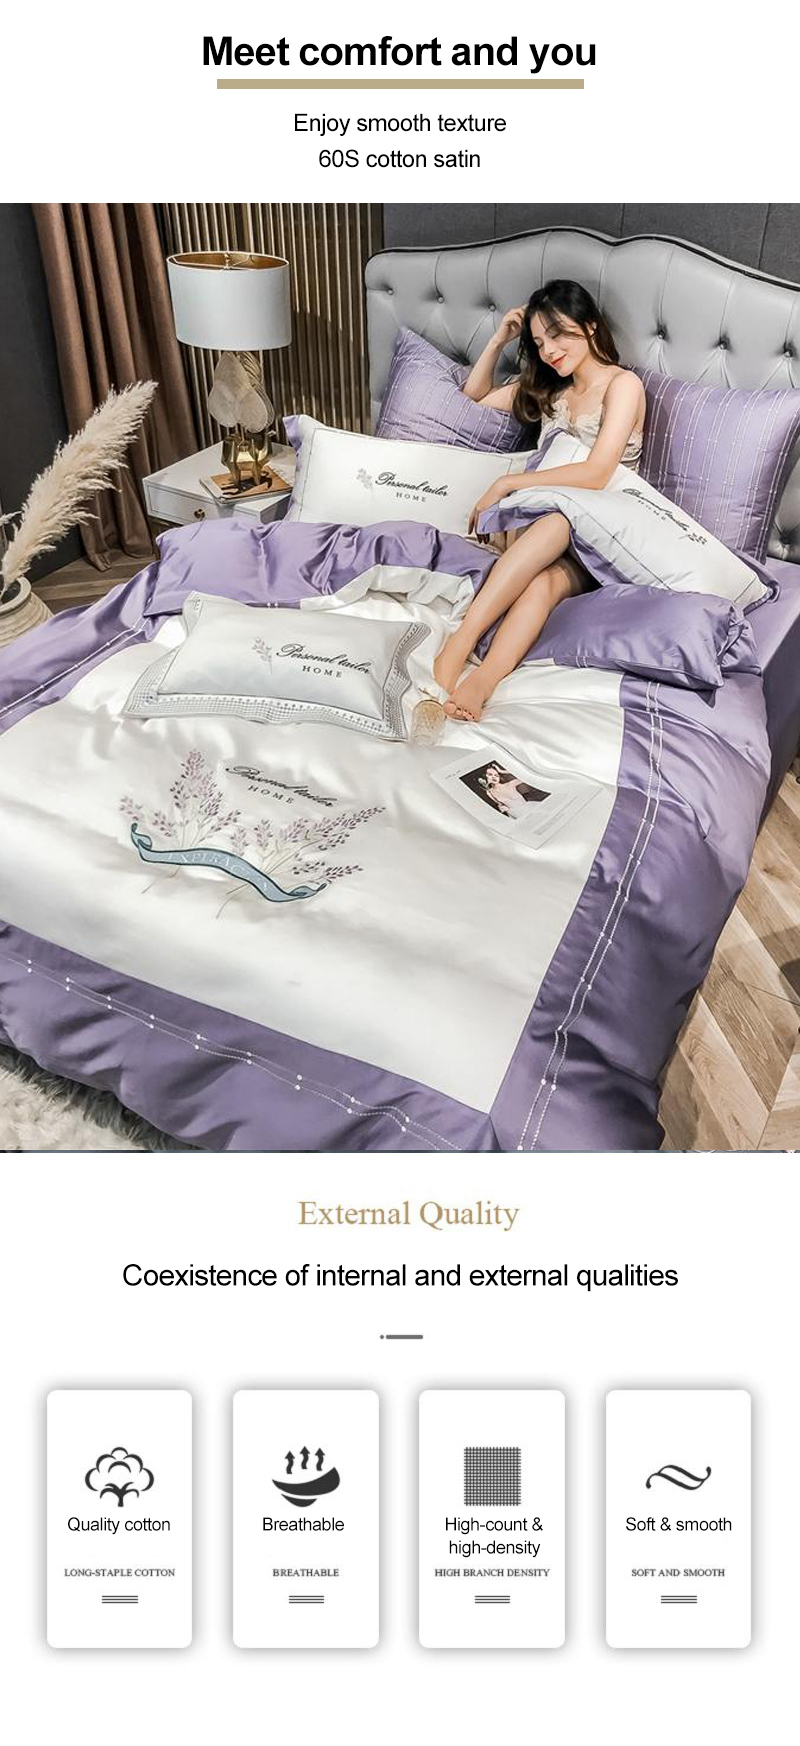 King Bed Smooth Bedding